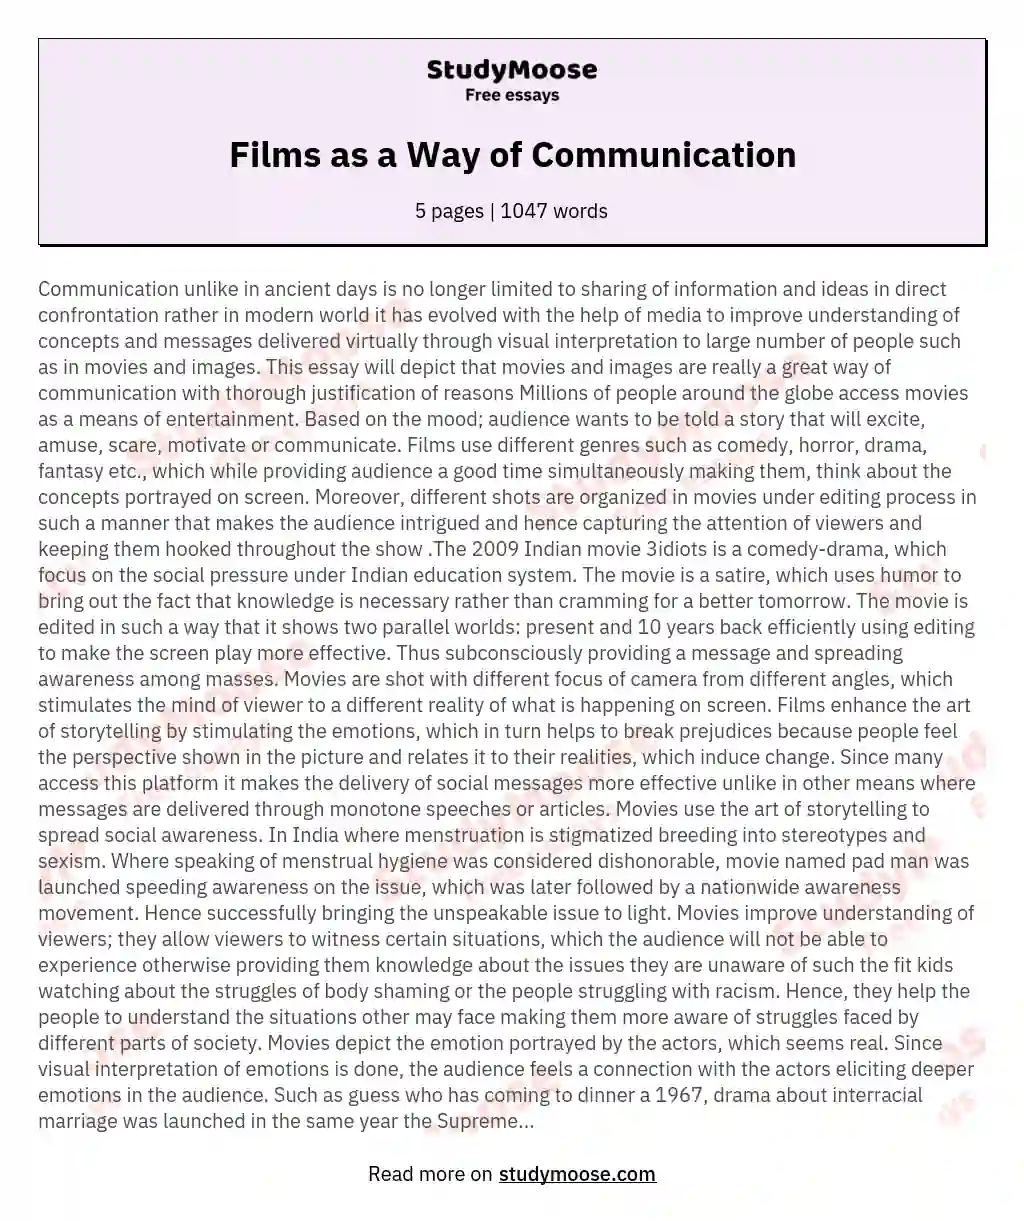 Films as a Way of Communication essay